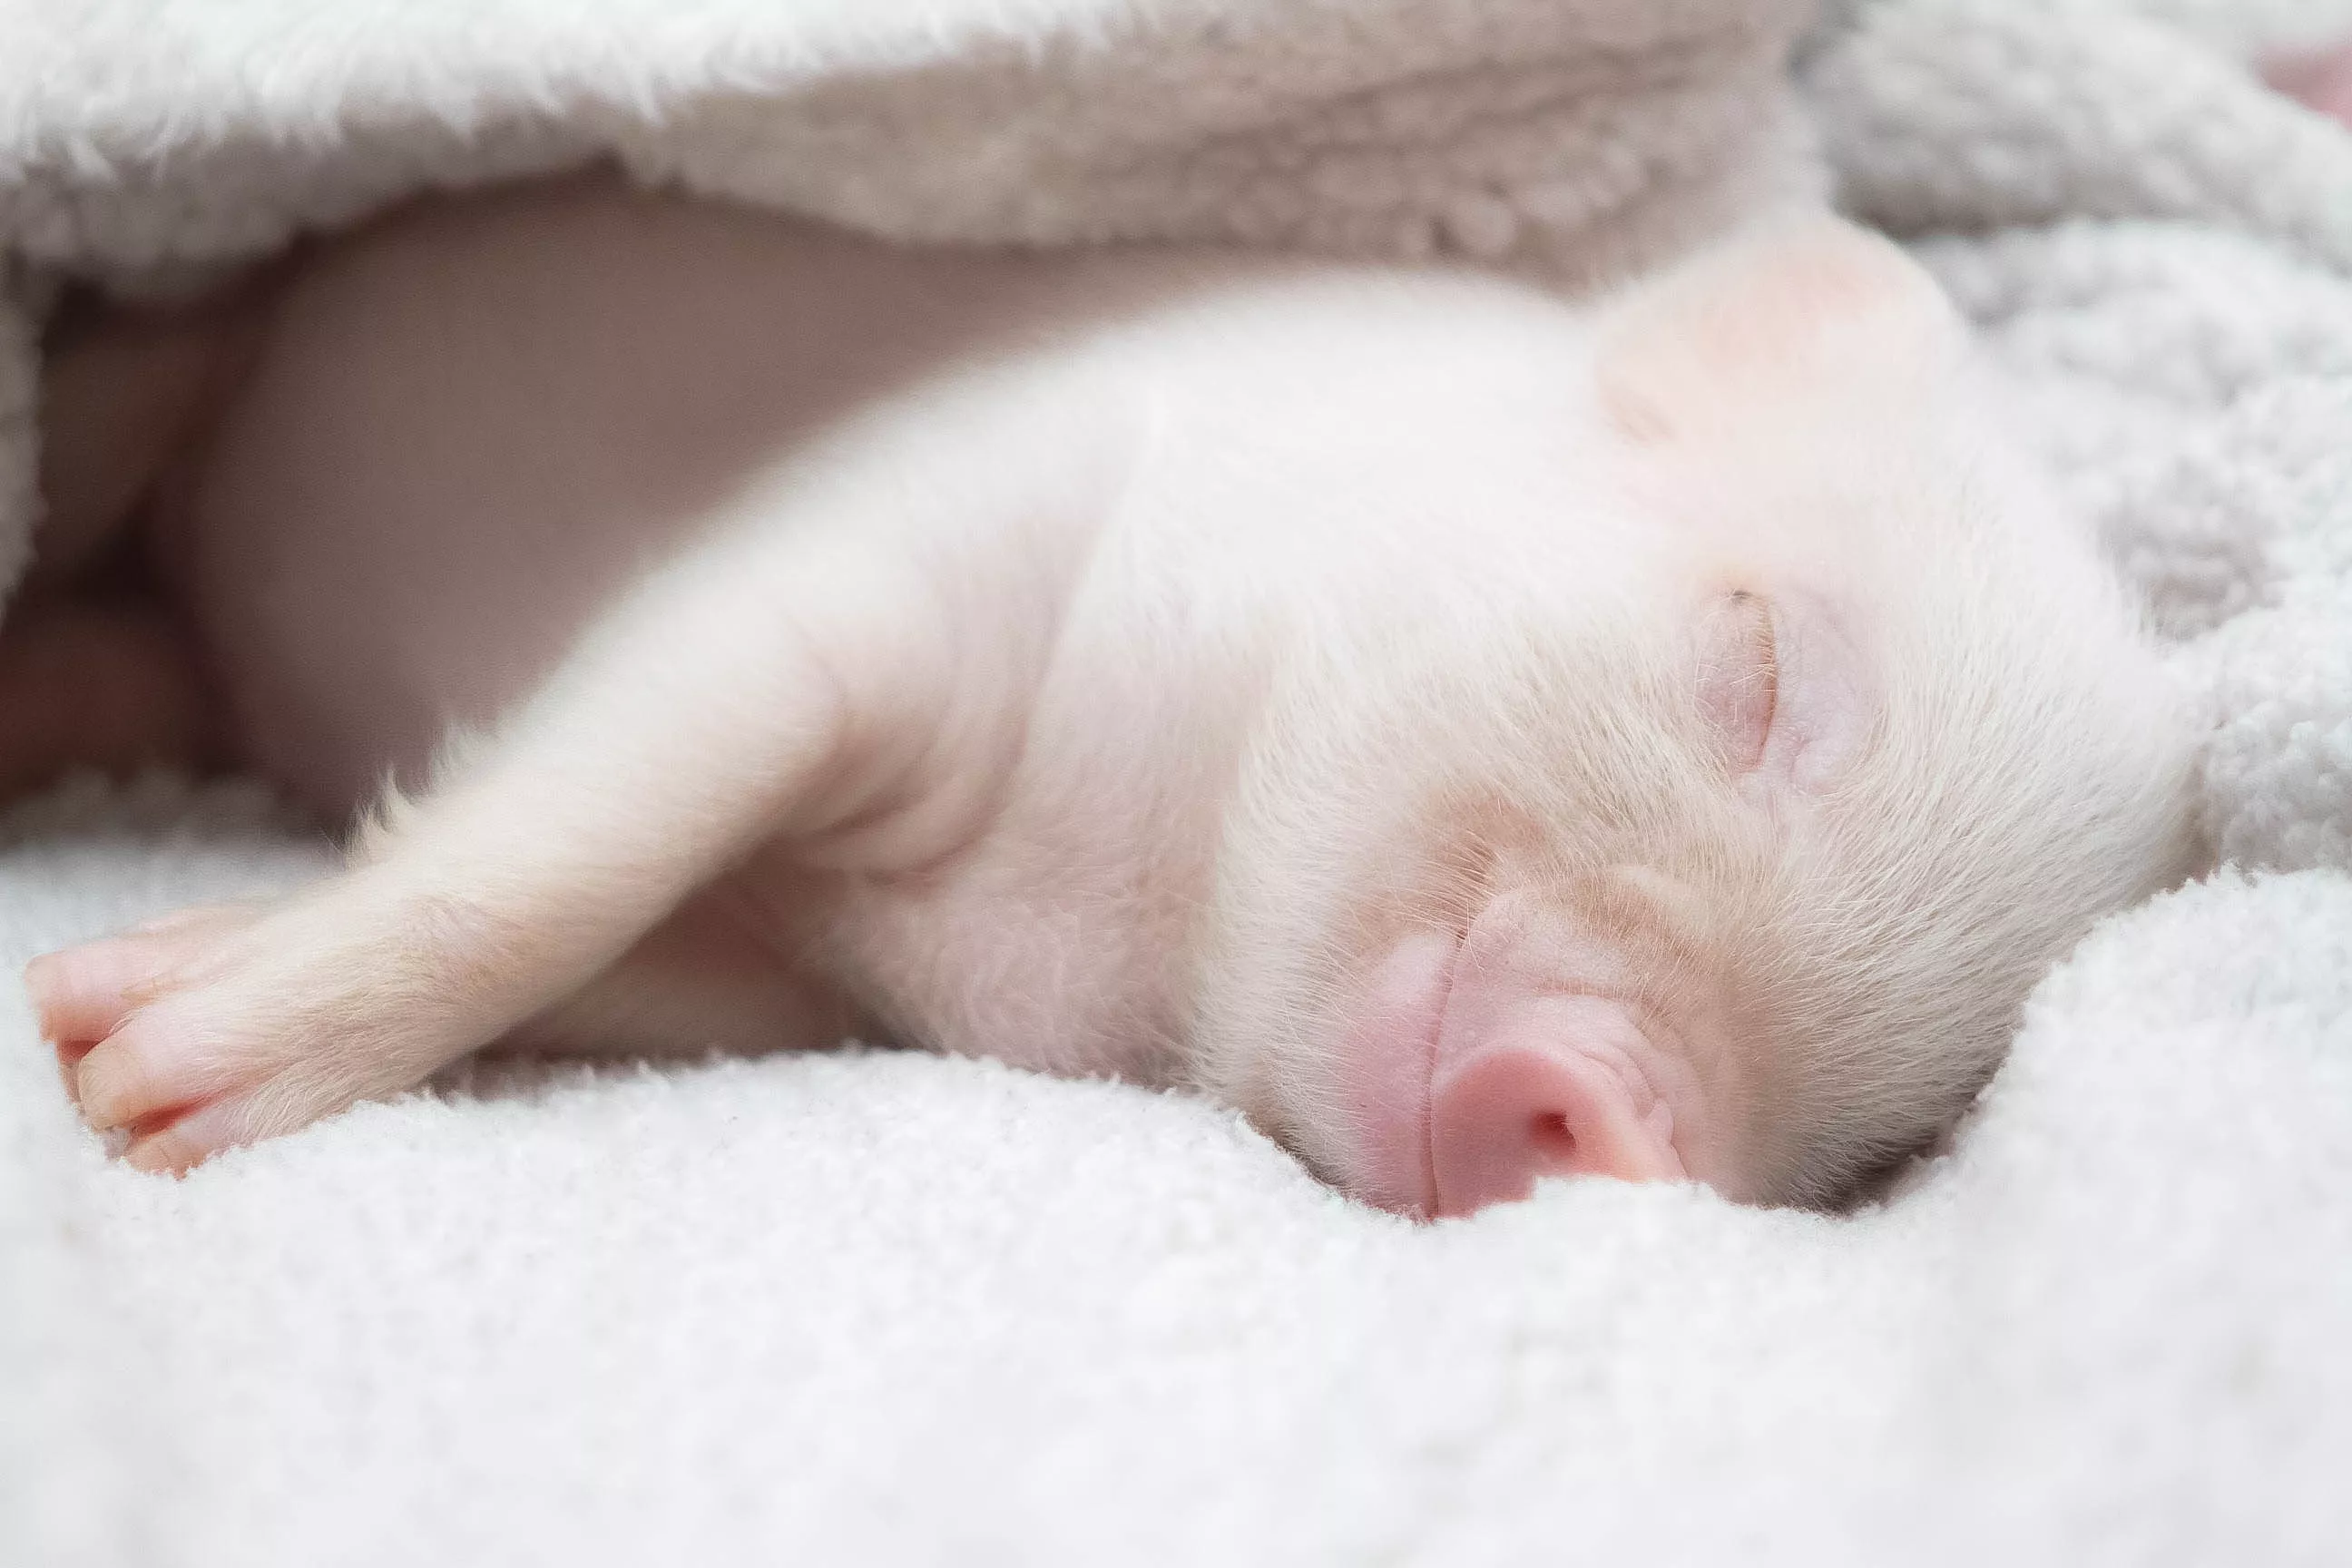 A piglet peacefully sleeping in a candid blanket.